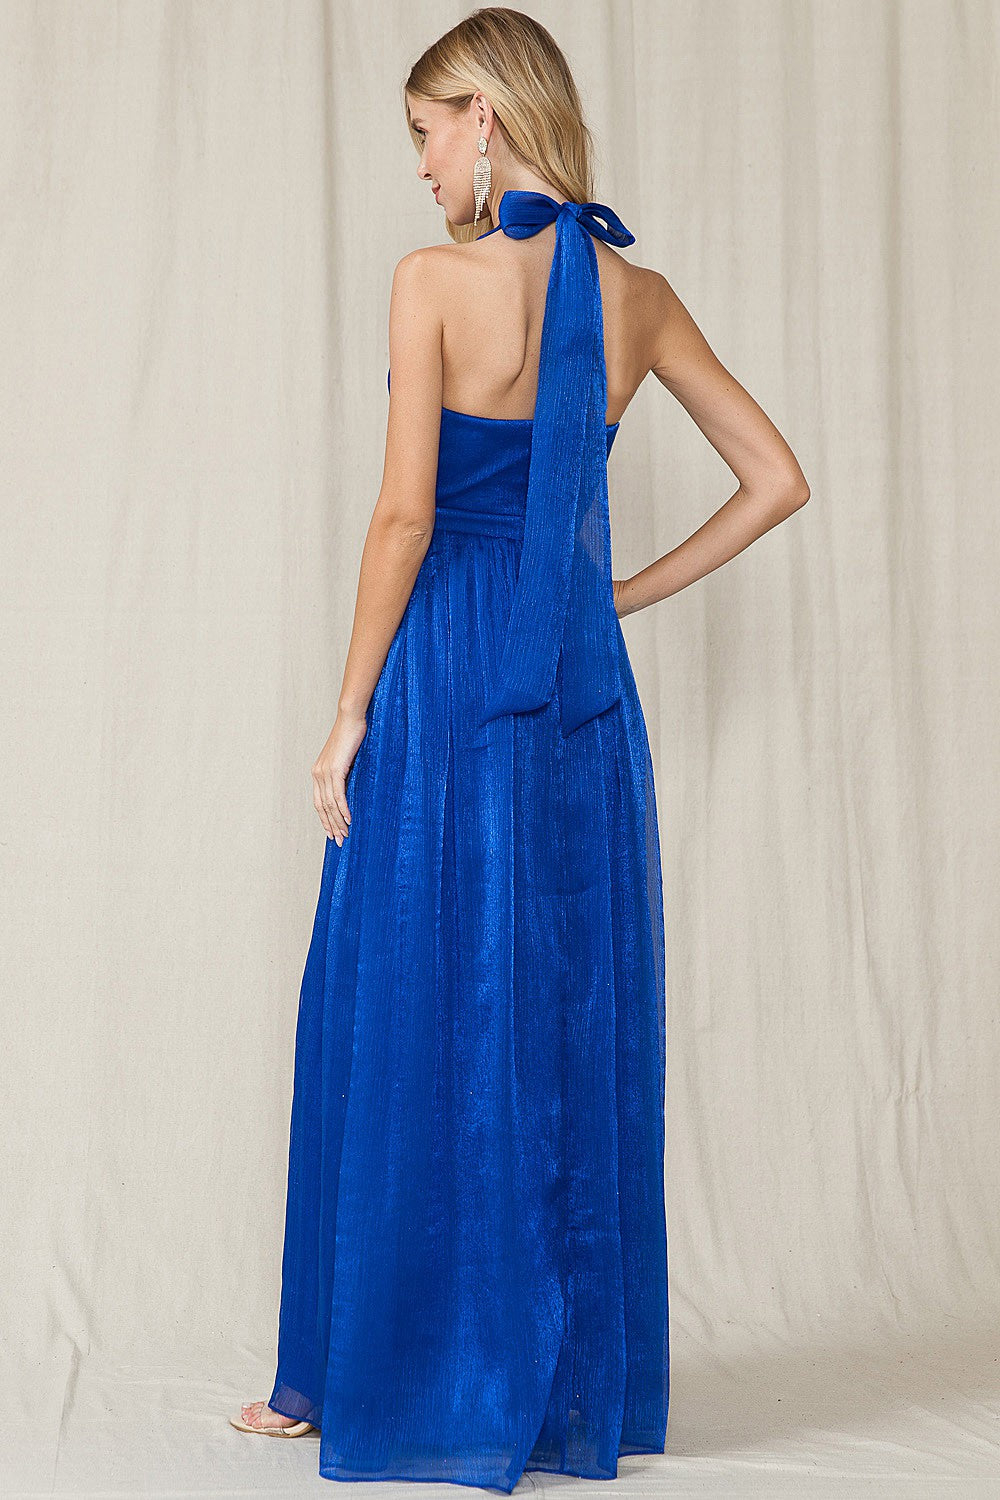 MG GOWN ROYAL BLUE